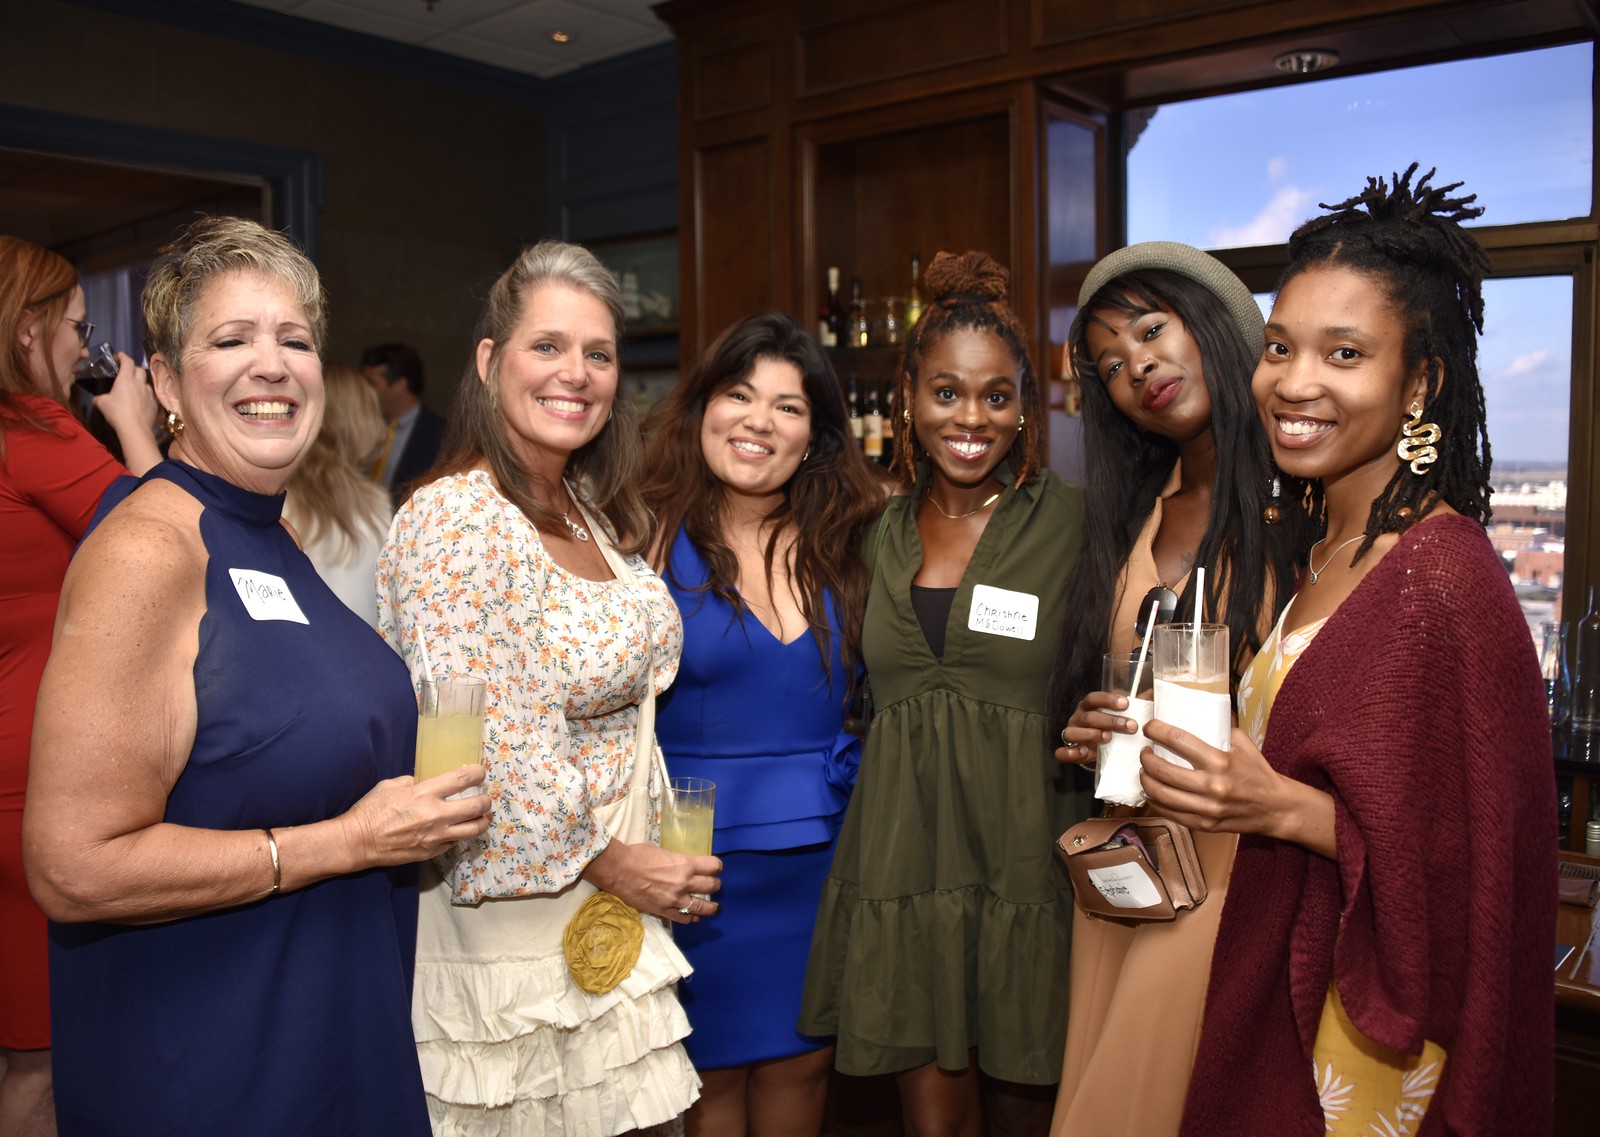 Georgia Chamber Connections at the Chatham Club